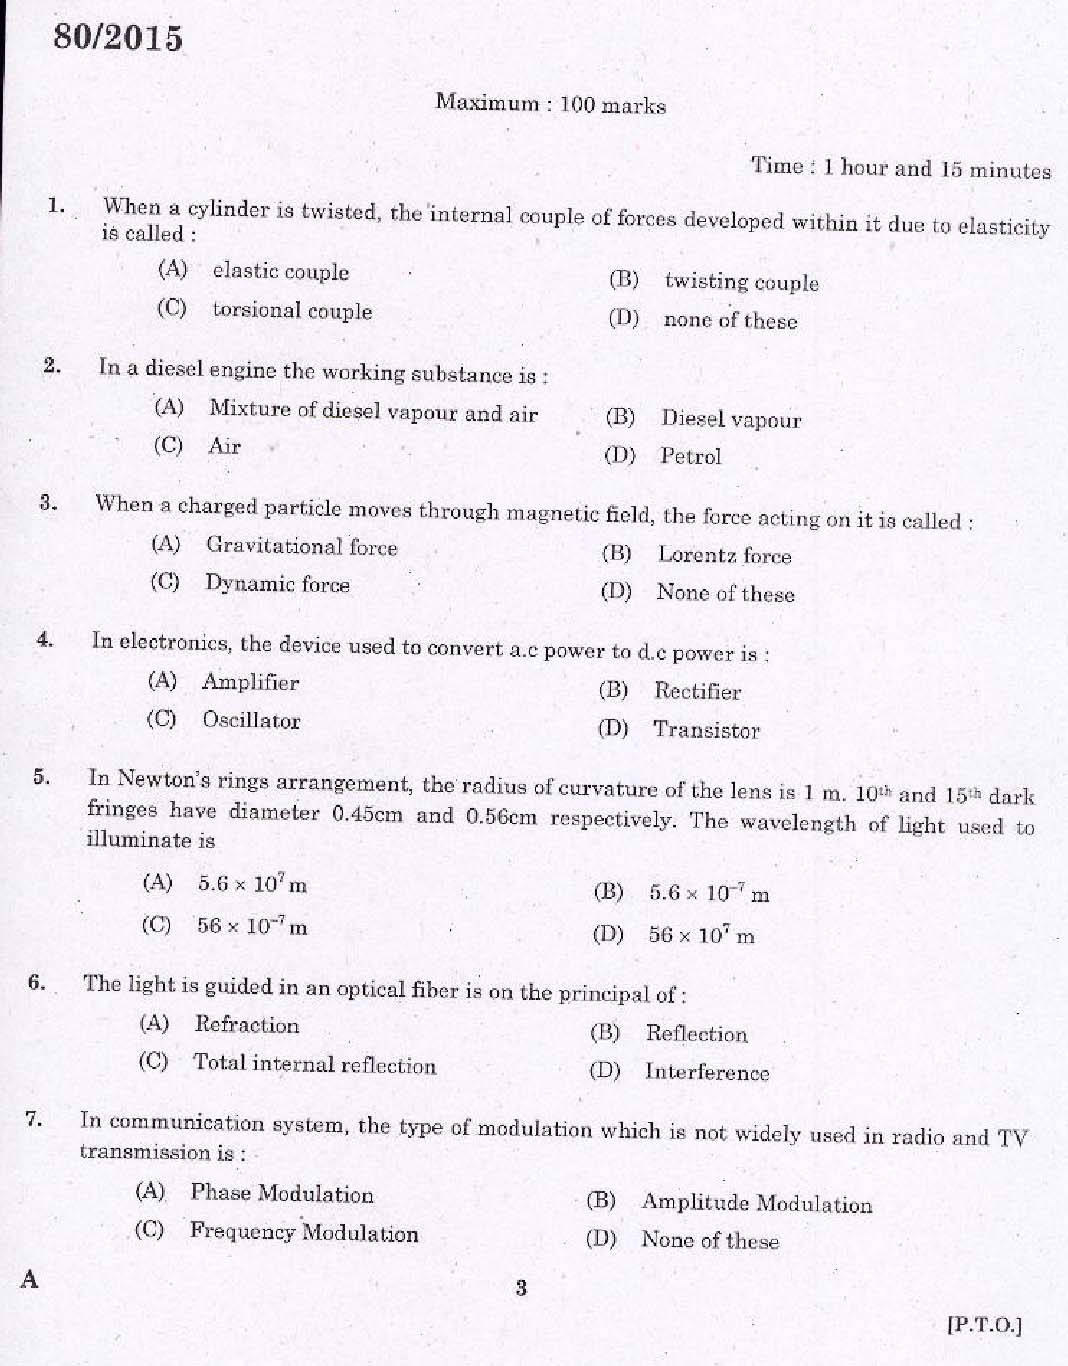 Kerala PSC Station Officer Exam Question Code 802015 1